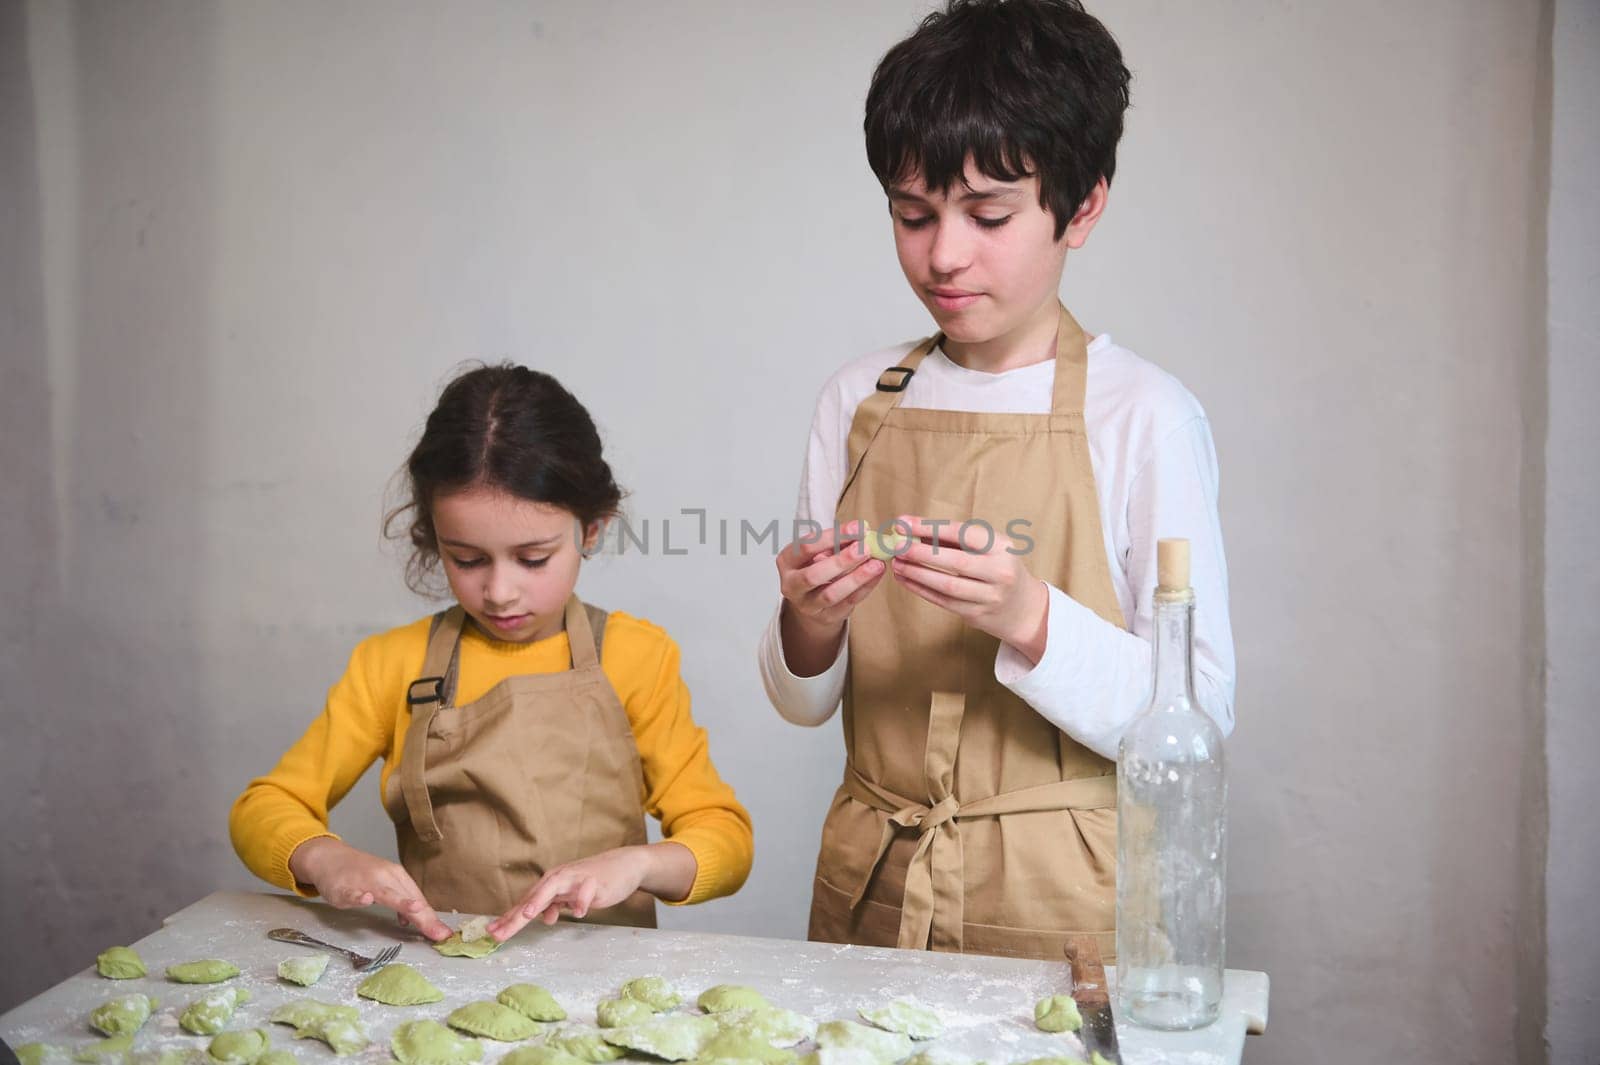 Cooking class for kids. Boy and girl preparing family dinner, standing at floured kitchen table and modeling dumplings or Ukrainian varennyky in the rural house kitchen interior by artgf